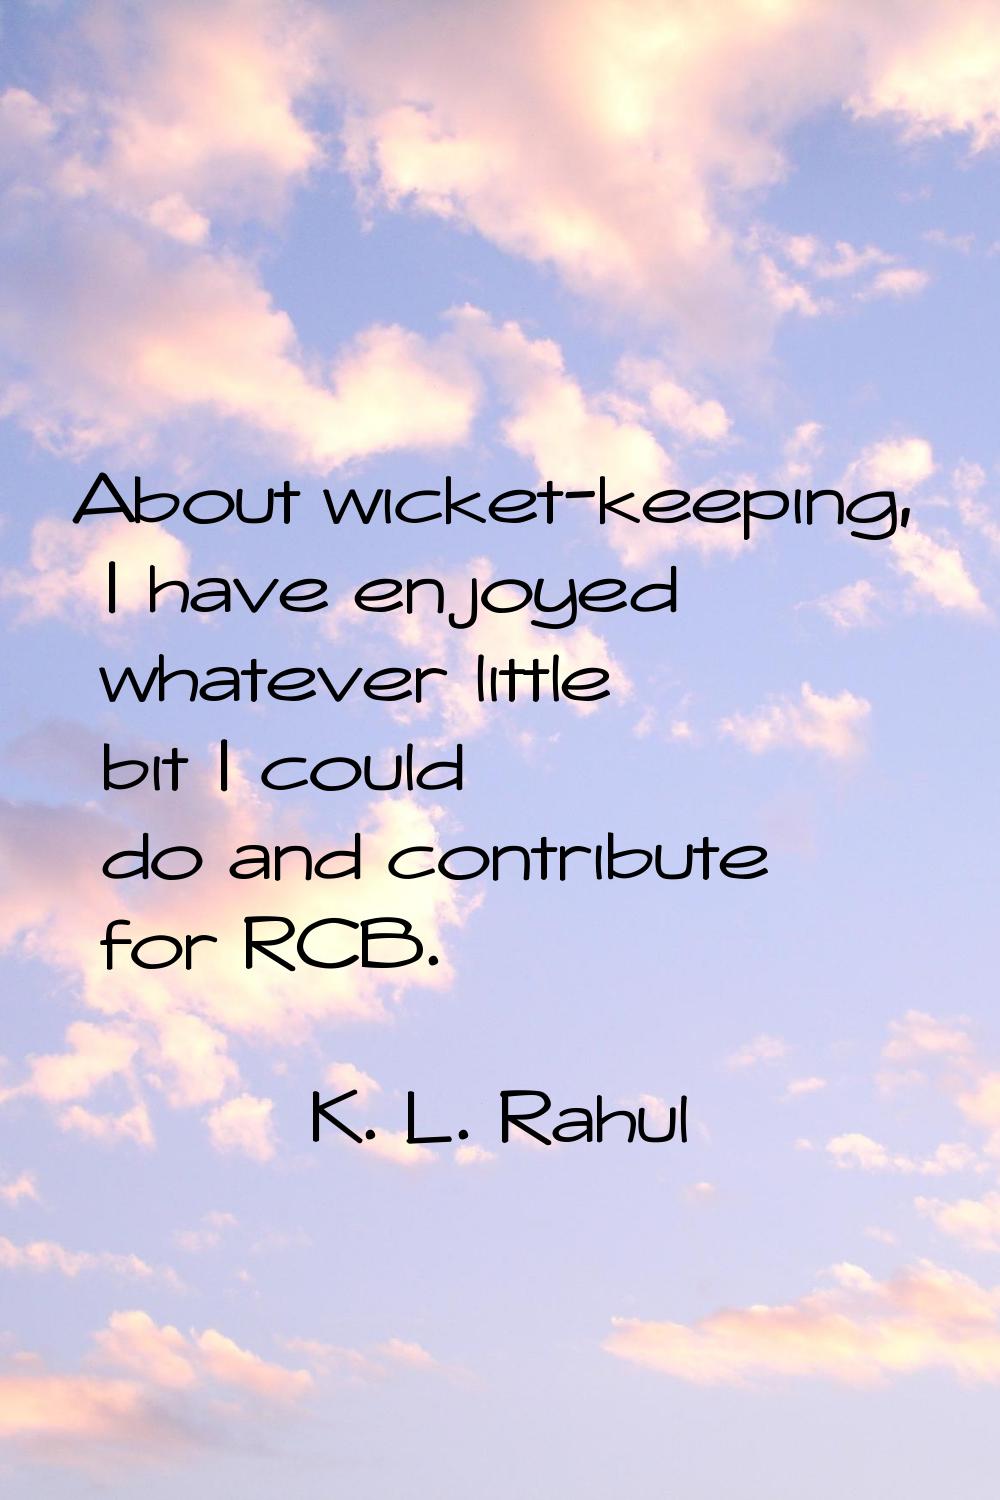 About wicket-keeping, I have enjoyed whatever little bit I could do and contribute for RCB.